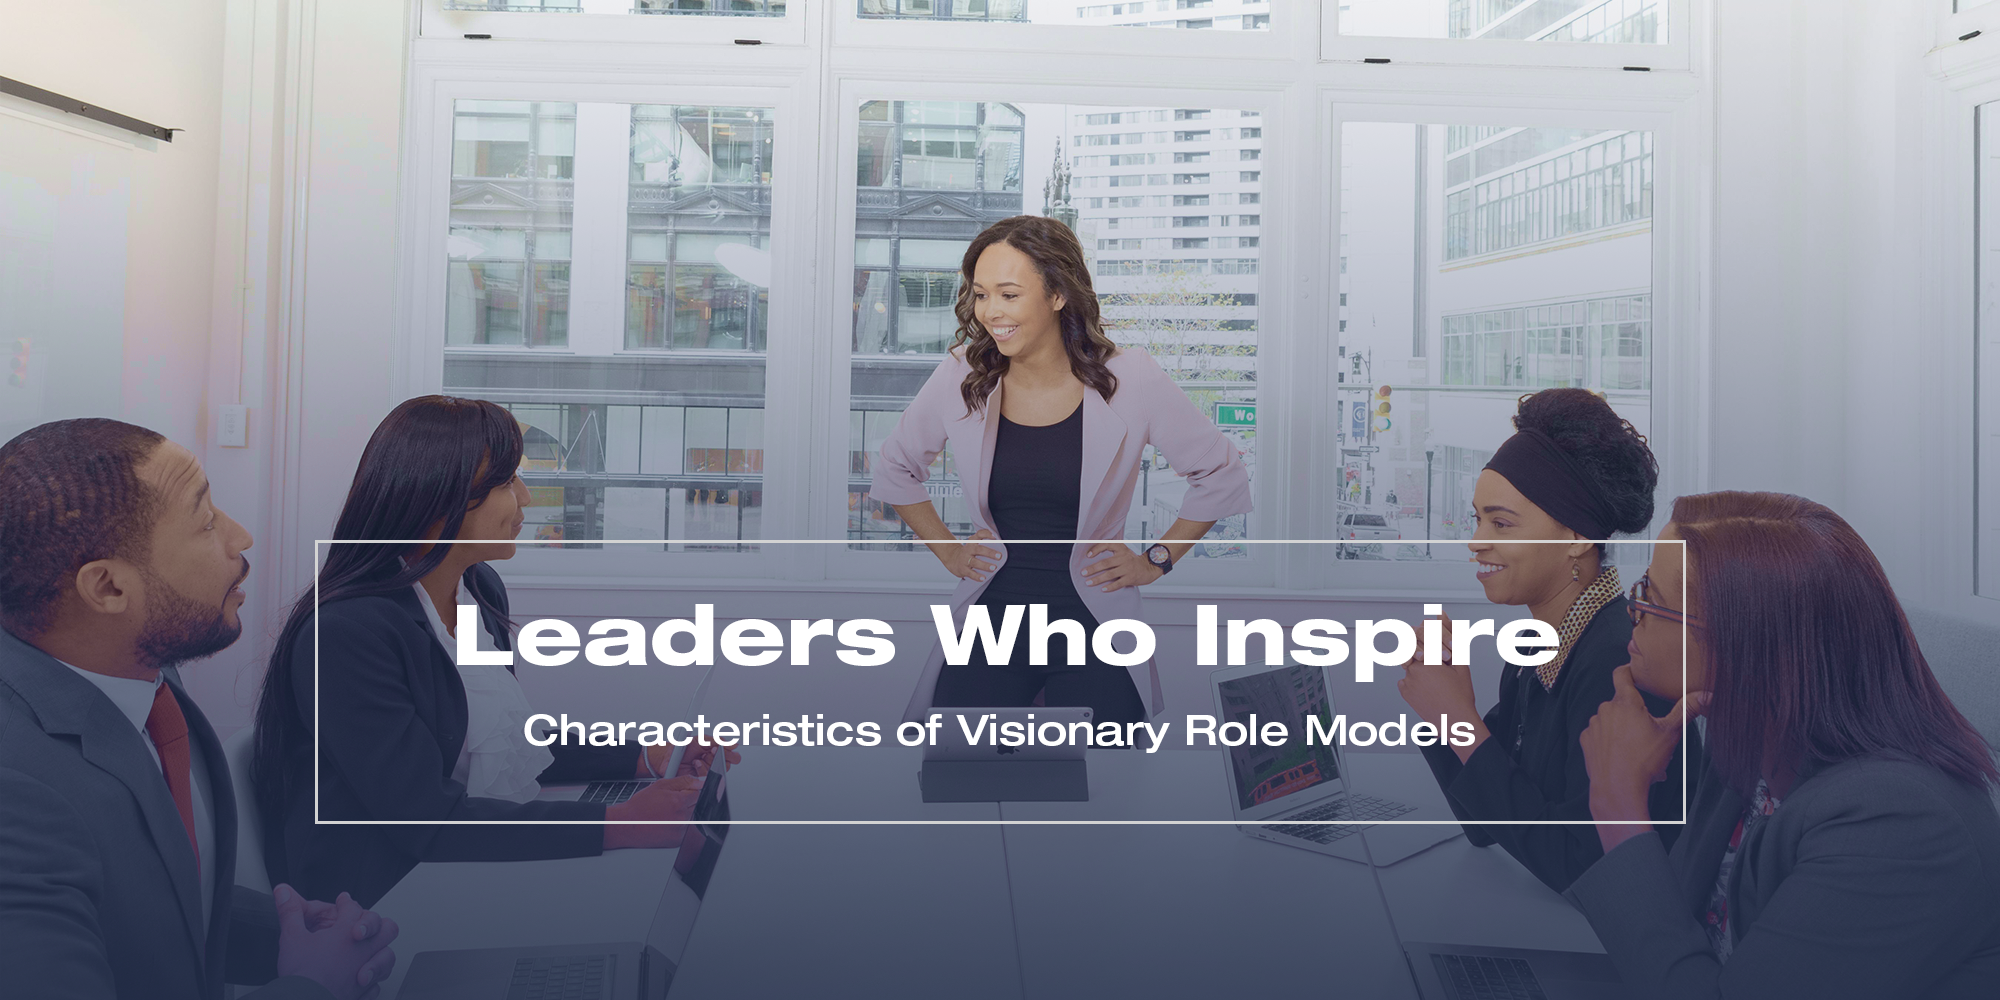 Leaders Who Inspire: Characteristics of Visionary Role Models